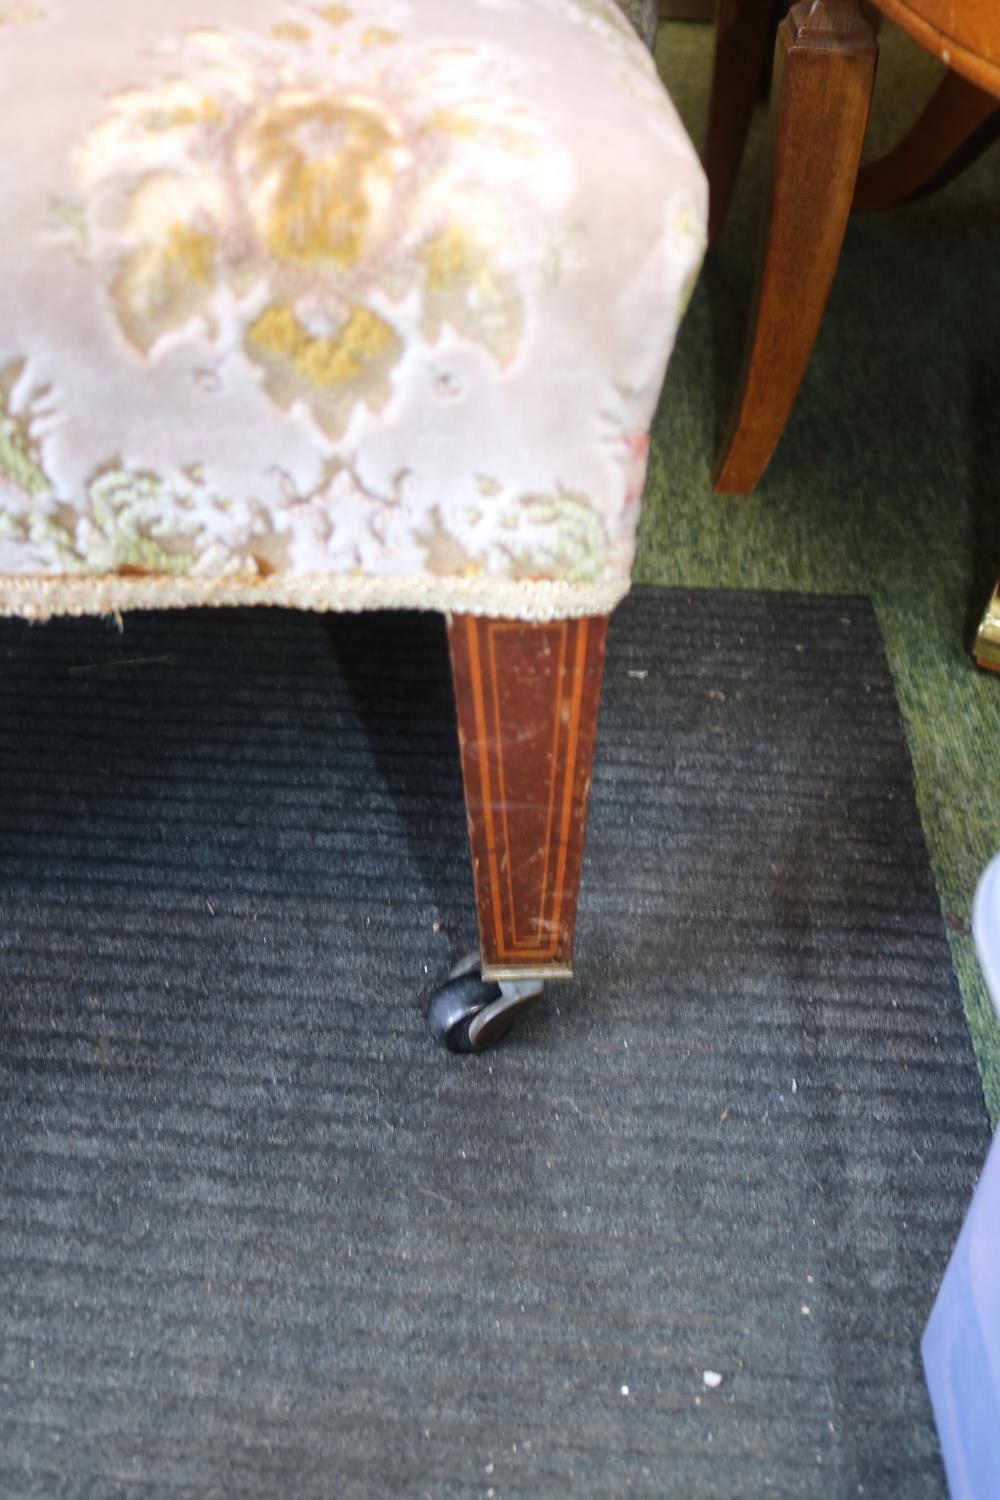 Pair of Edwardian Upholstered Tall backed Chairs with Inlaid tapering legs - Image 2 of 2